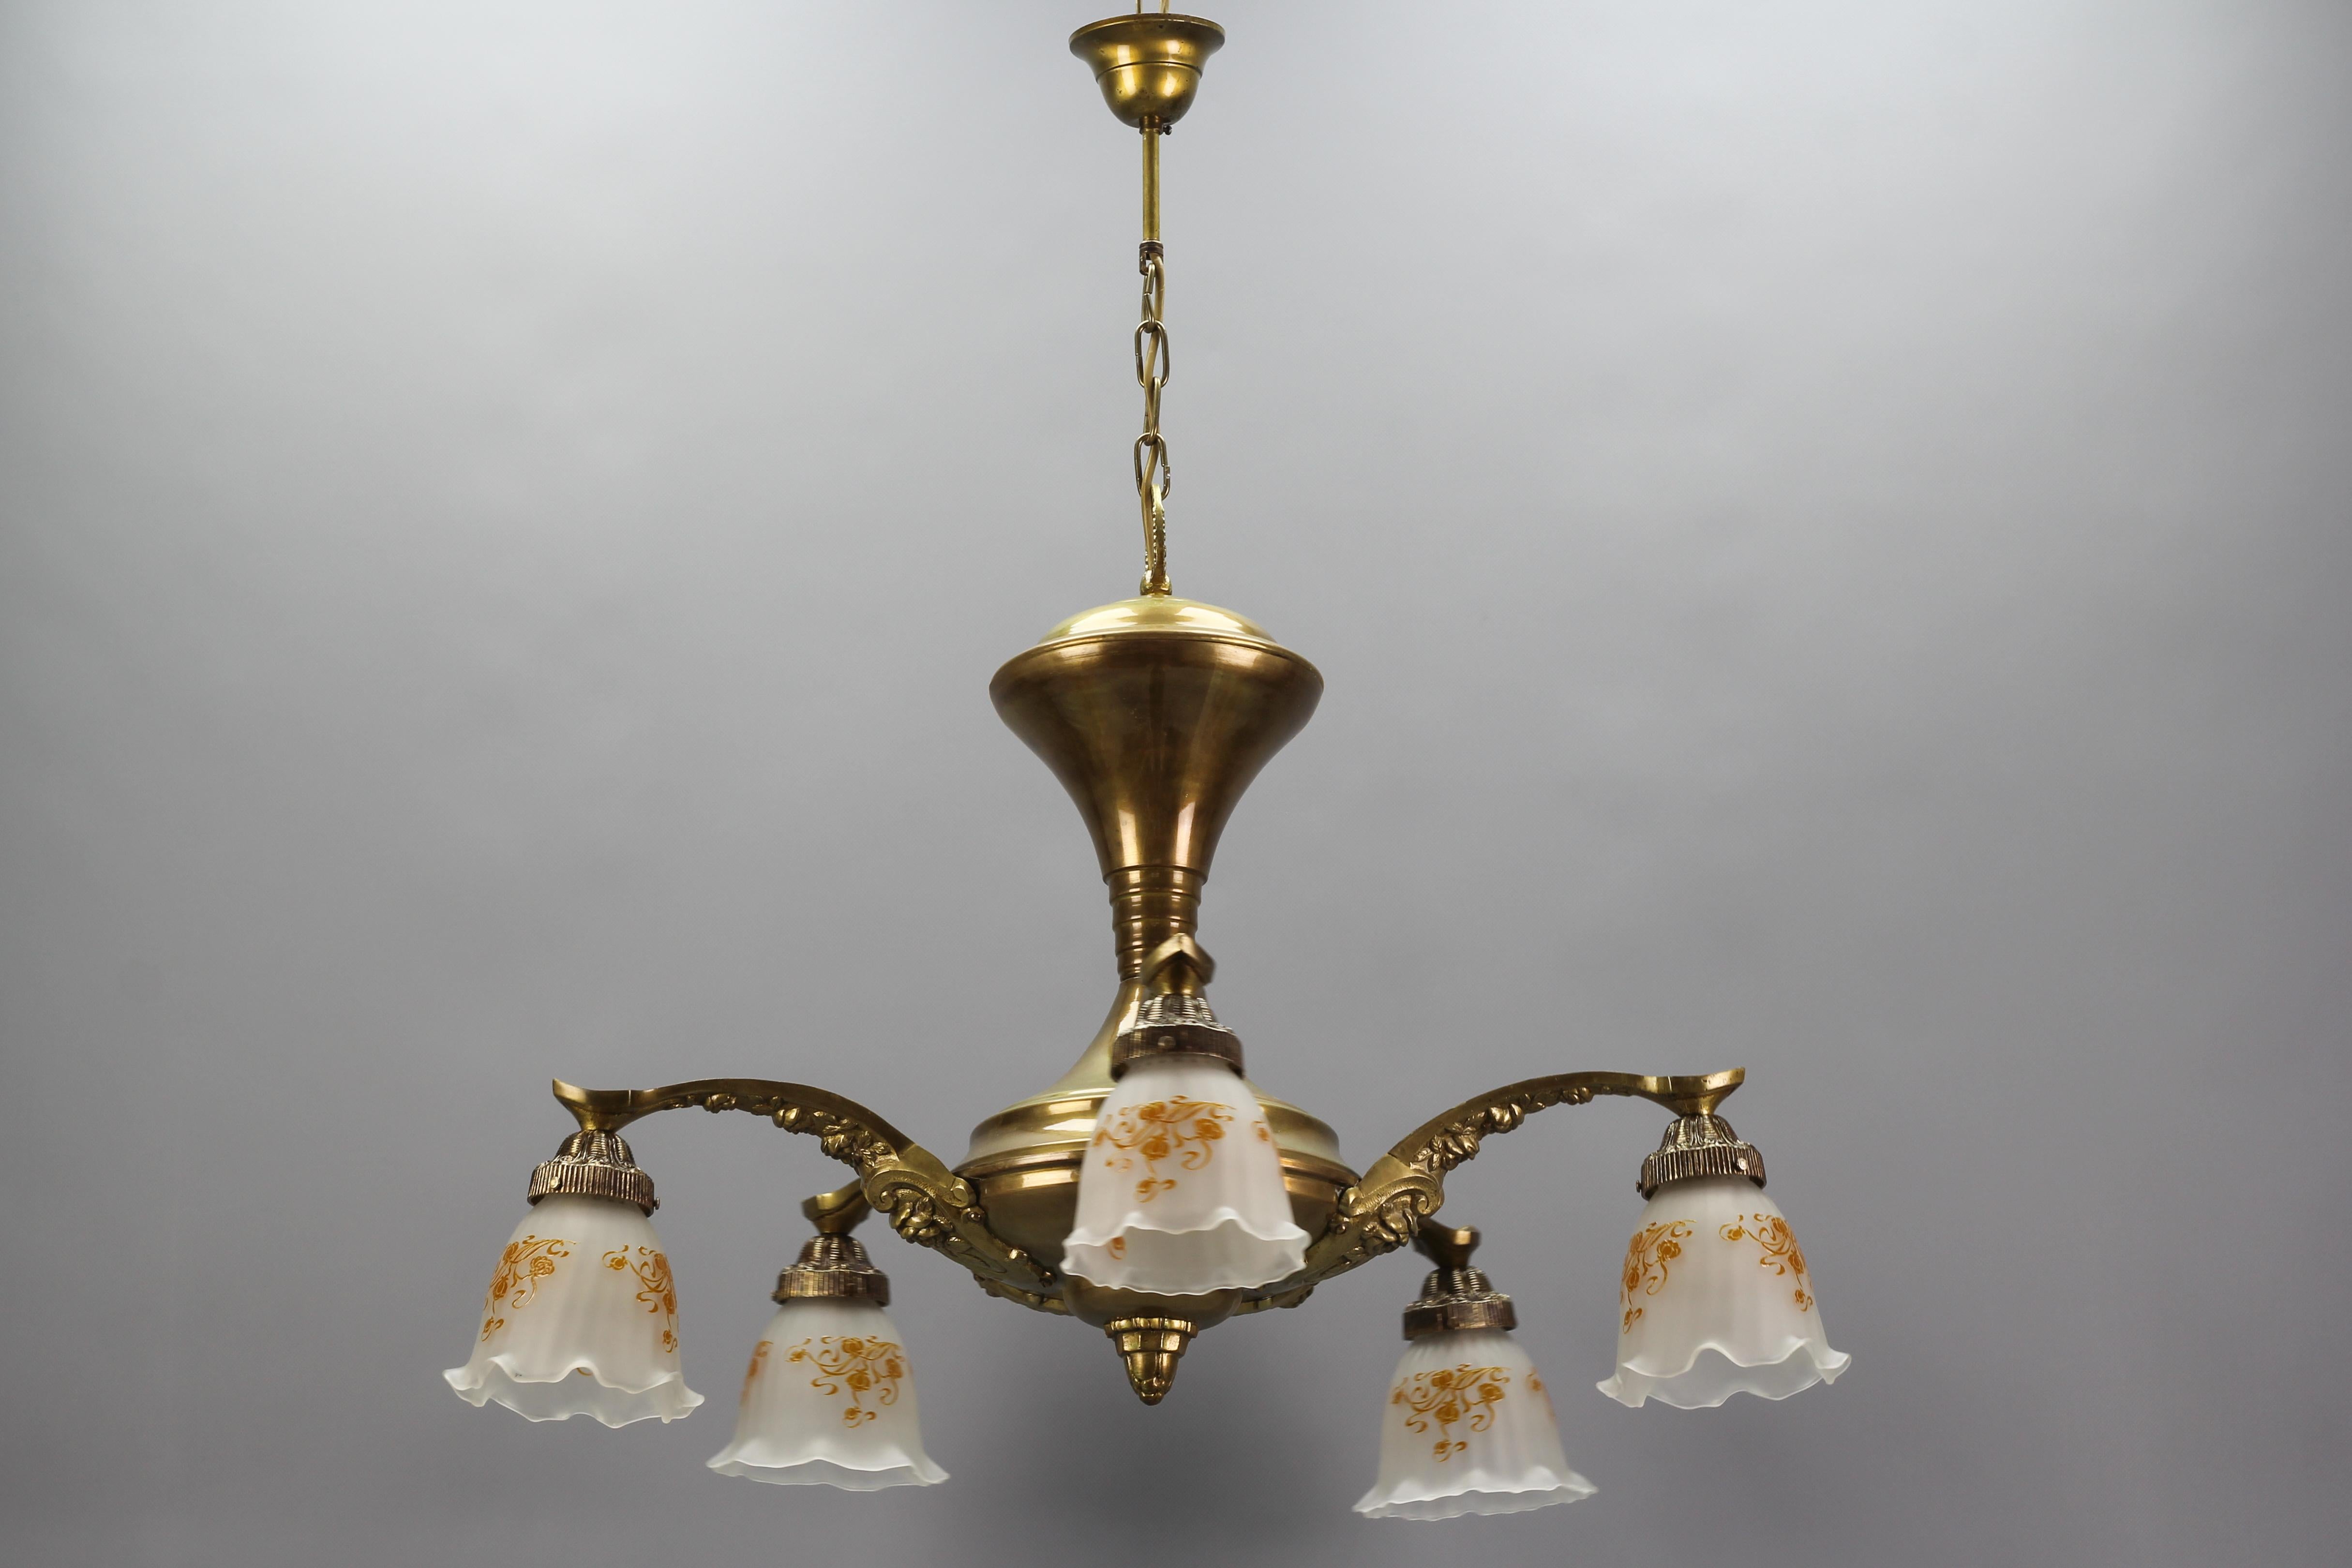 French Art Nouveau Brass and Bronze Five-Light Chandelier with Frosted Glass Shades For Sale